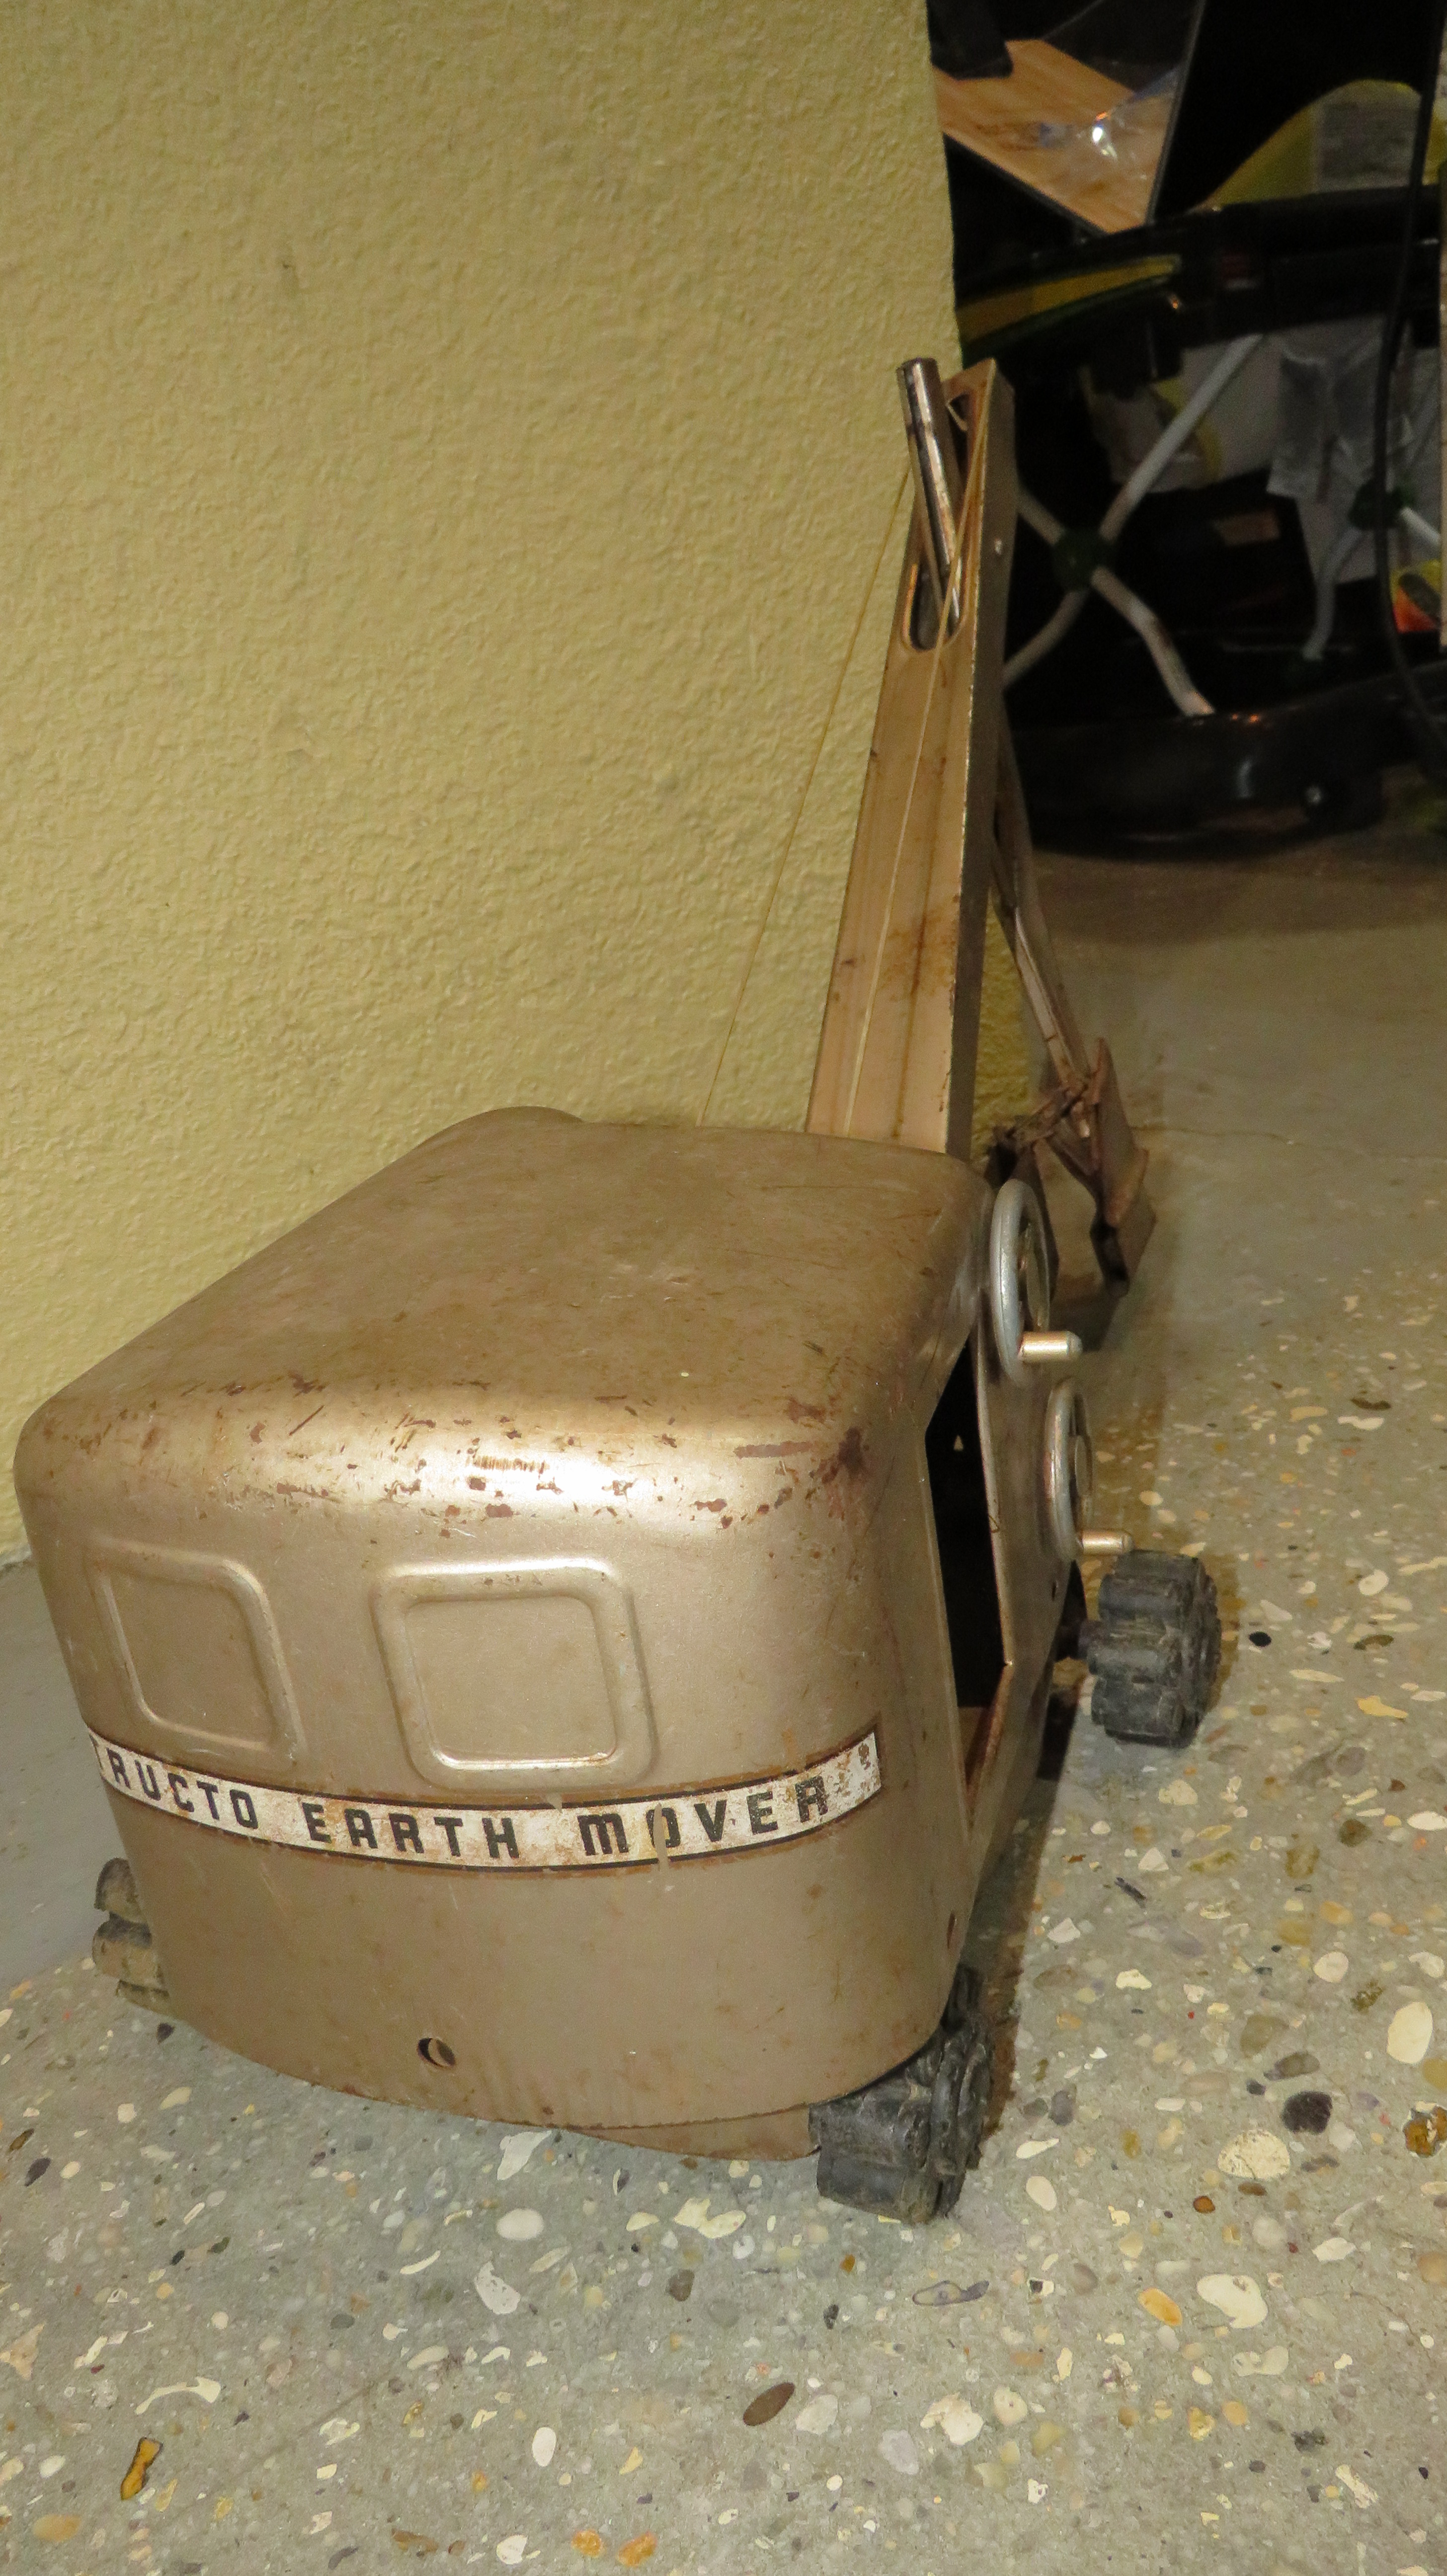 2nd Image of a N/A STRUTCO EARTH MOVER VINTAGE METAL